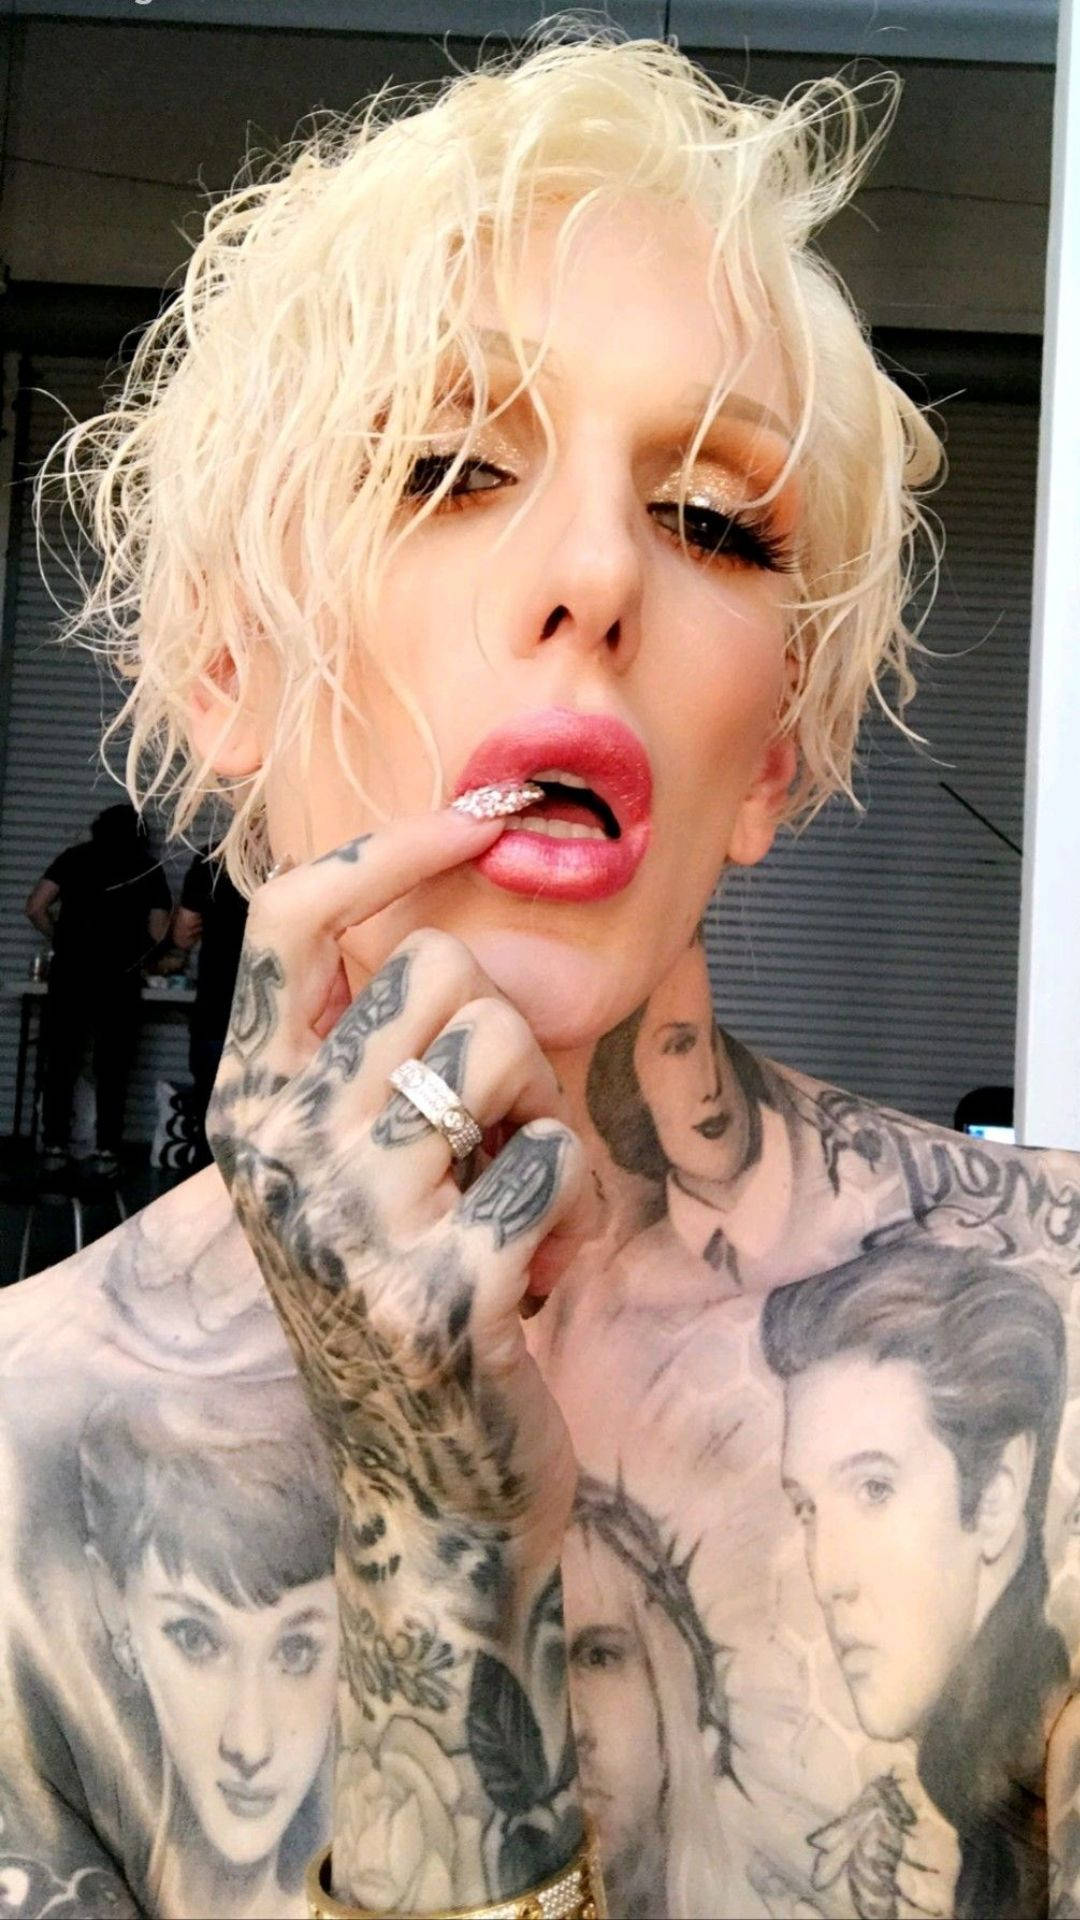 Jeffreestar Tattoos Would Be Translated To German As 